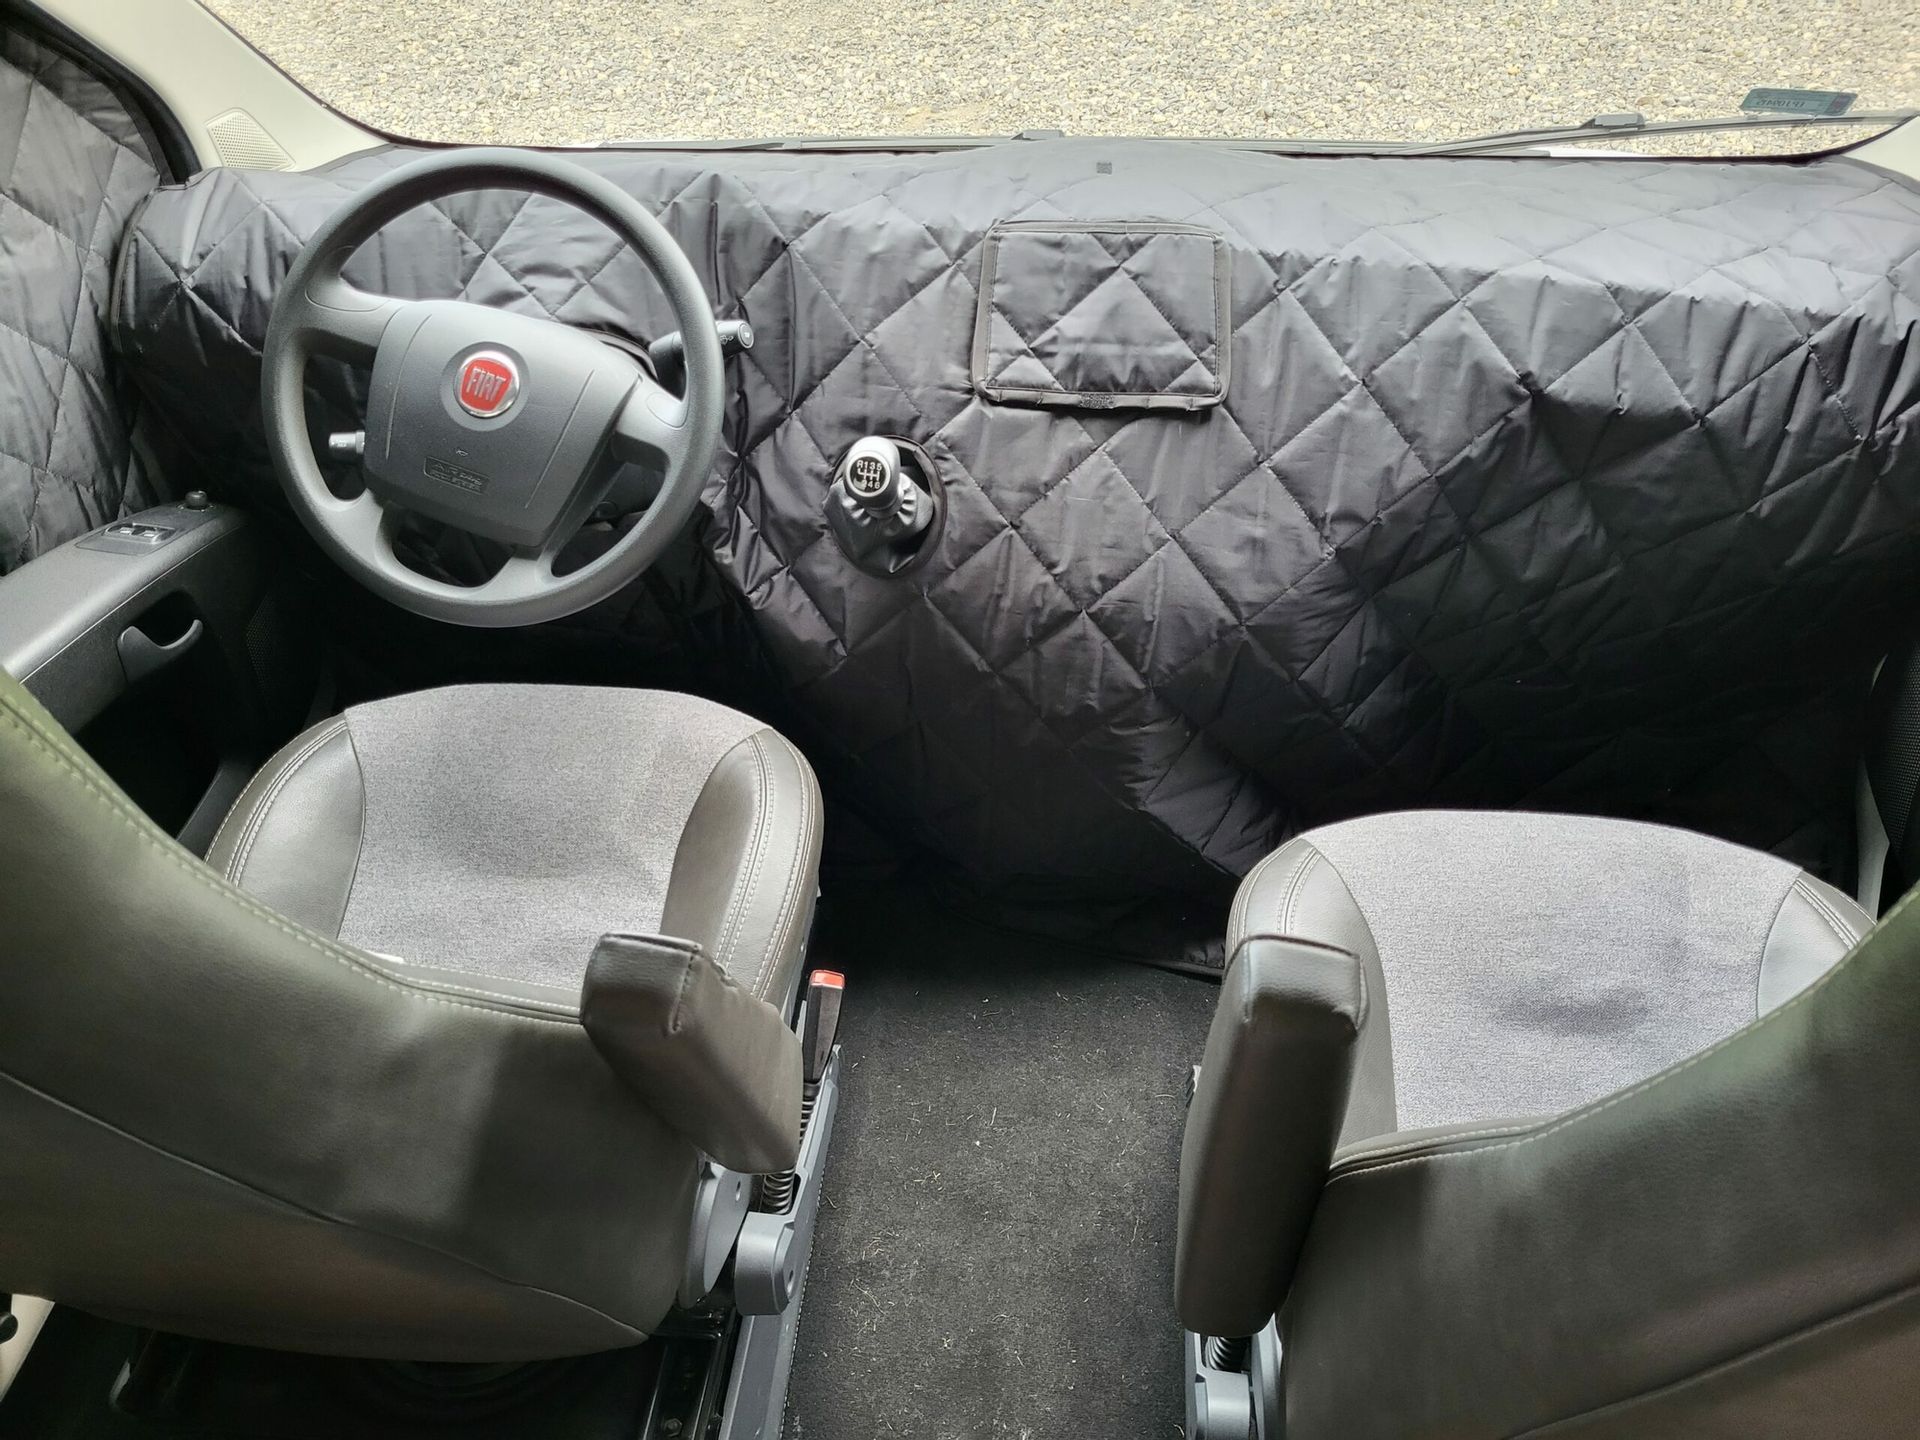 Thermal mats for campers and vans - Made to Measure – image 1